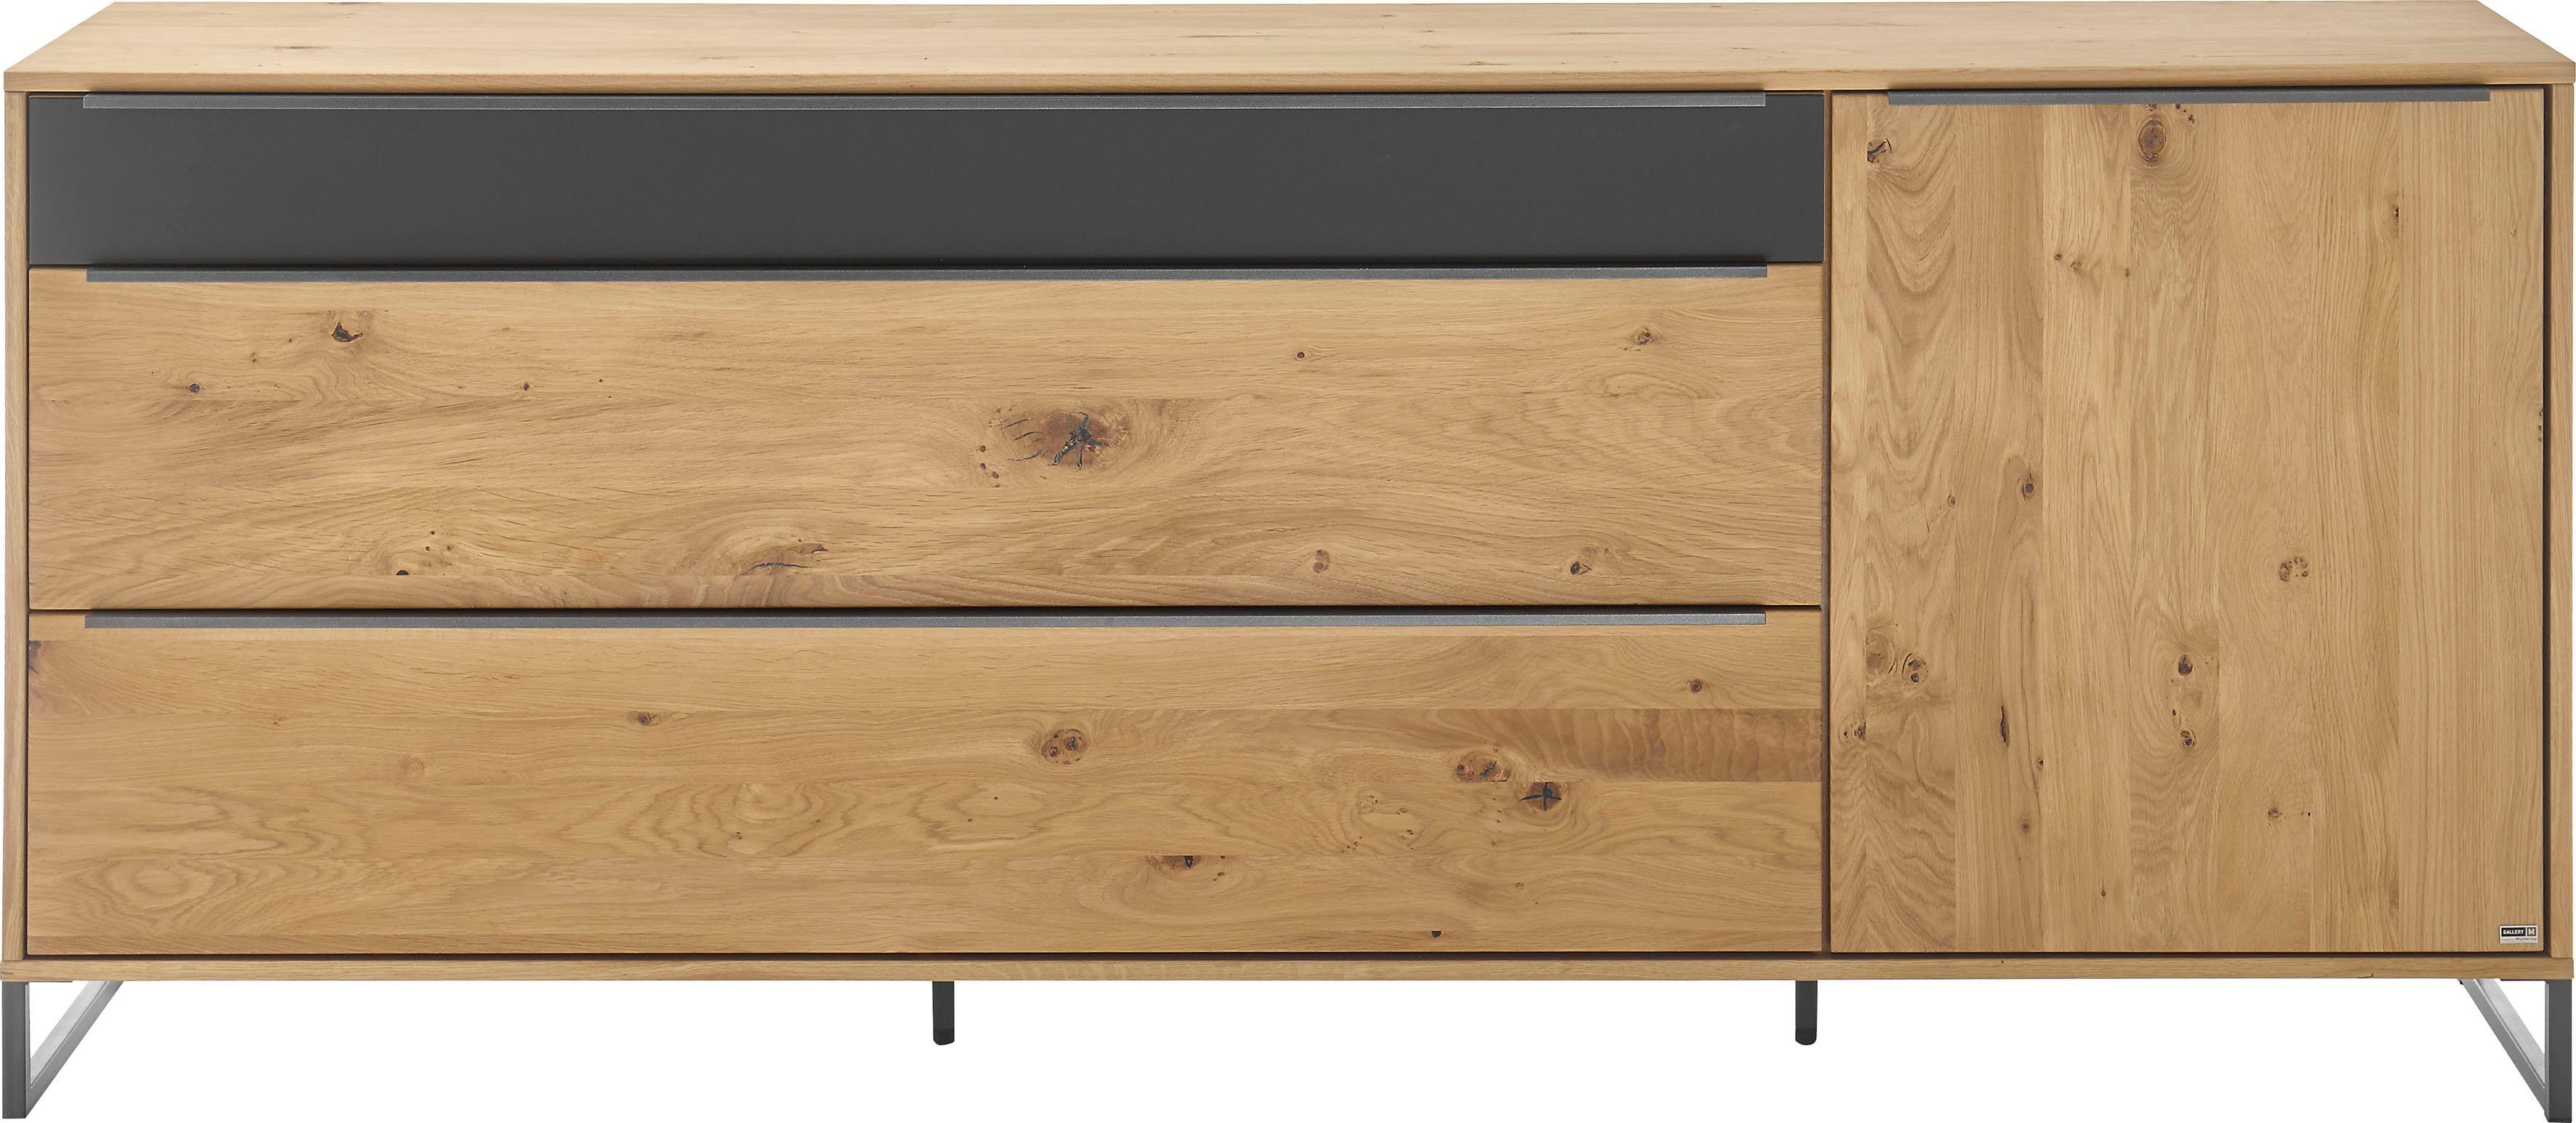 Sideboard Eiche Bainco Musterring anthrazit by geölt, Front Alan, Metall GALLERY Kufengestell in in Massiv branded M